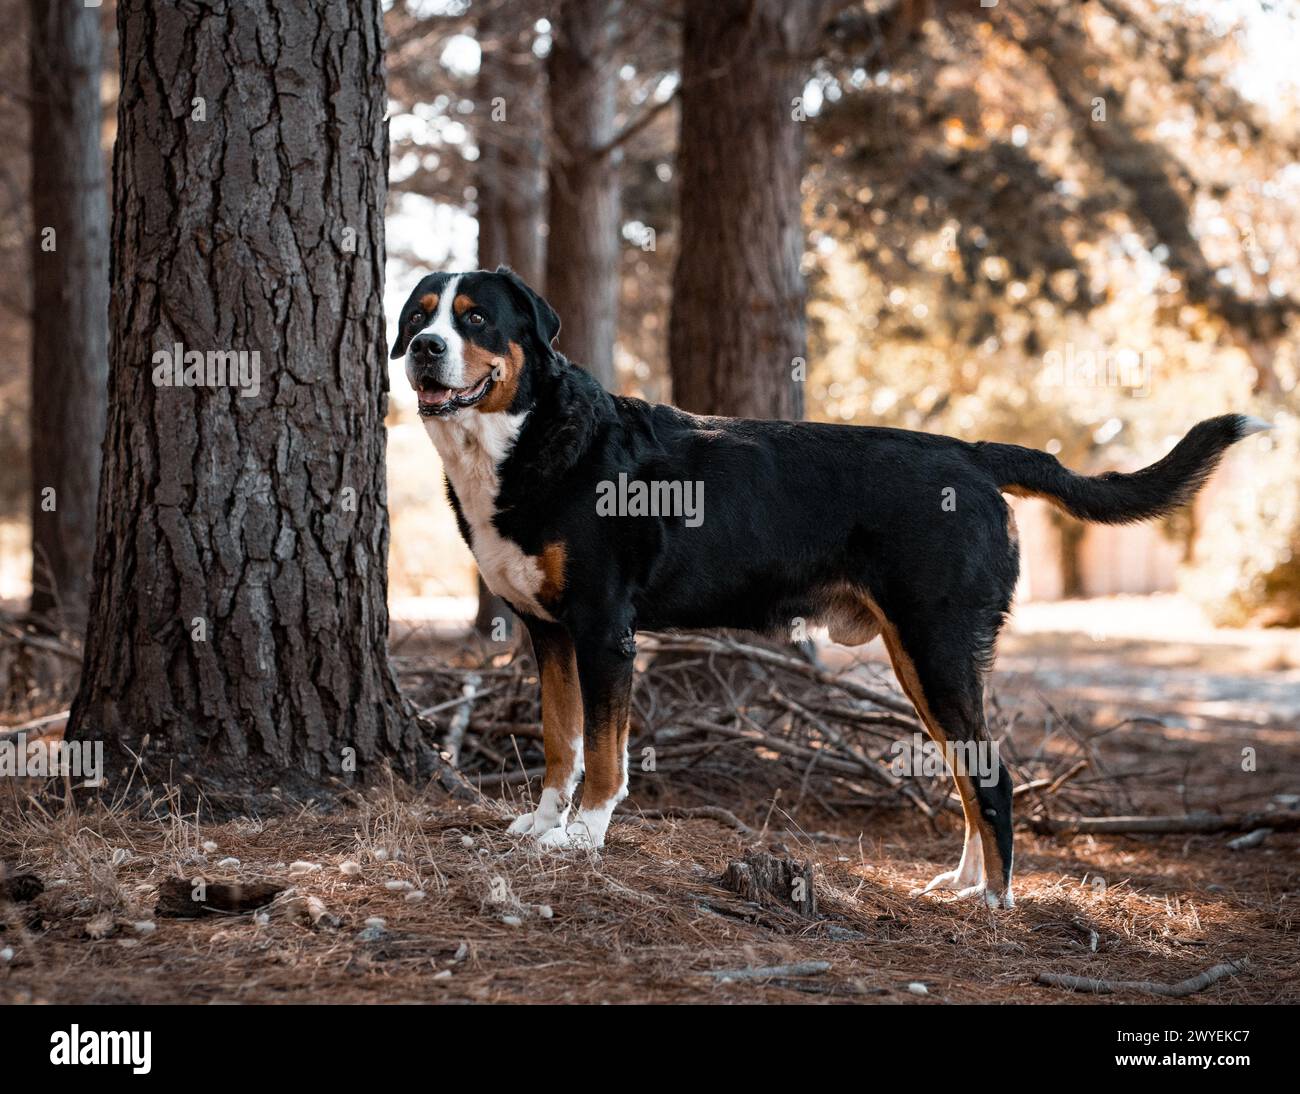 A Greater Swiss Mountain Dog in a forest Stock Photo